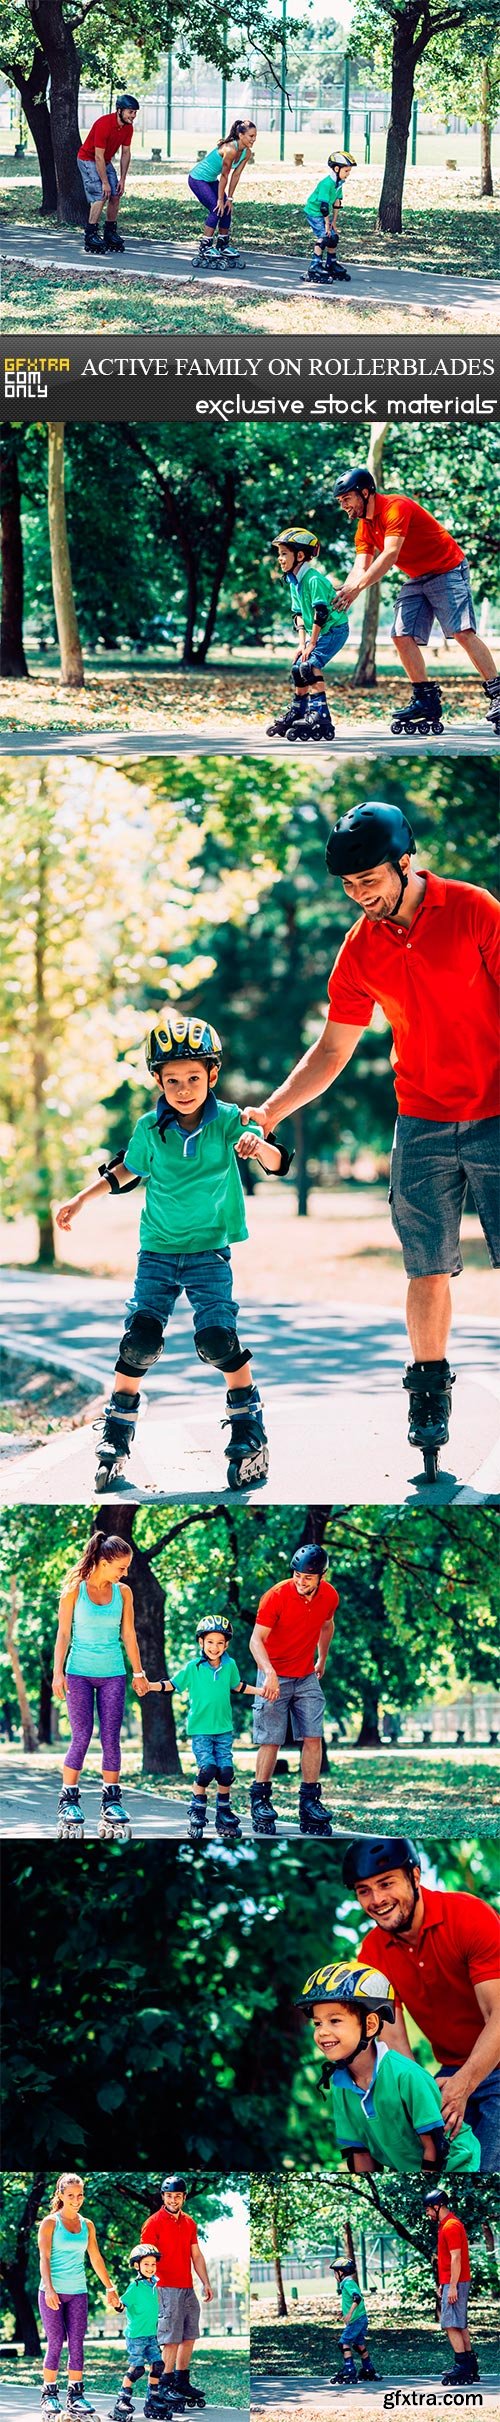 Active family on rollerblades - 7UHQ JPEG